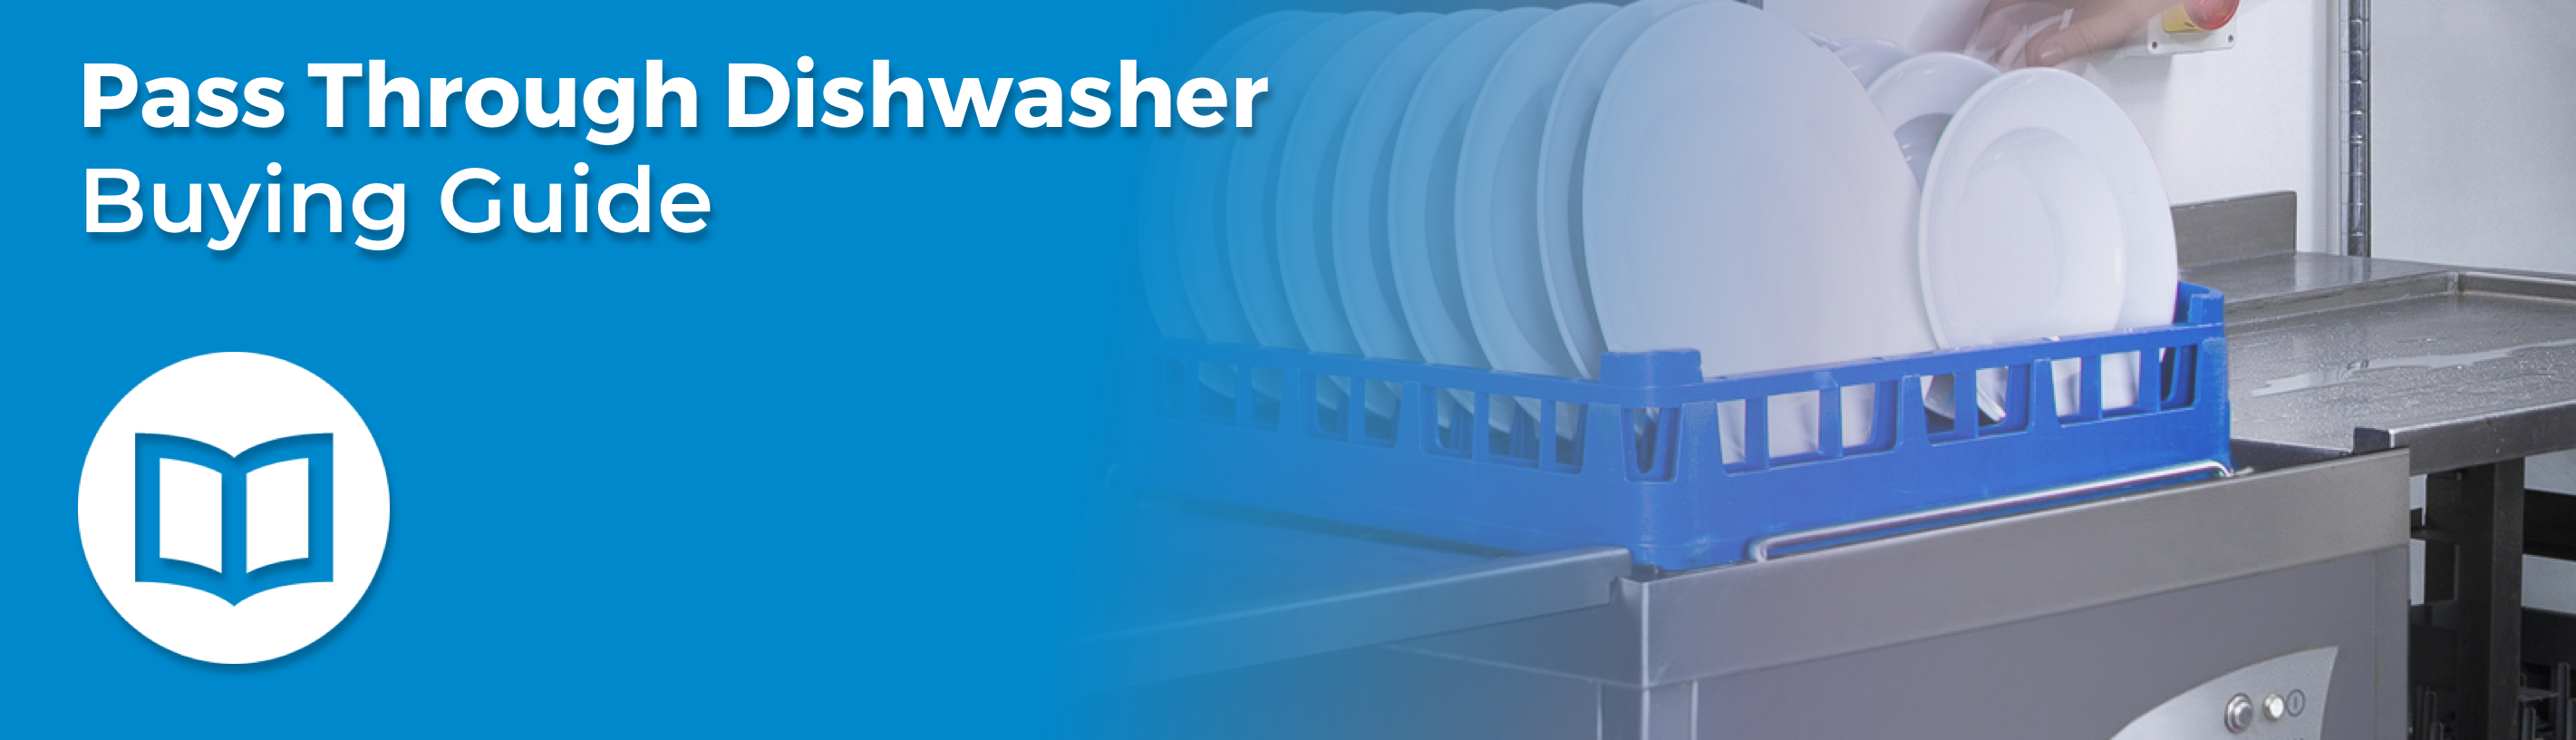 Commercial Pass Through Dishwasher Buying Guide